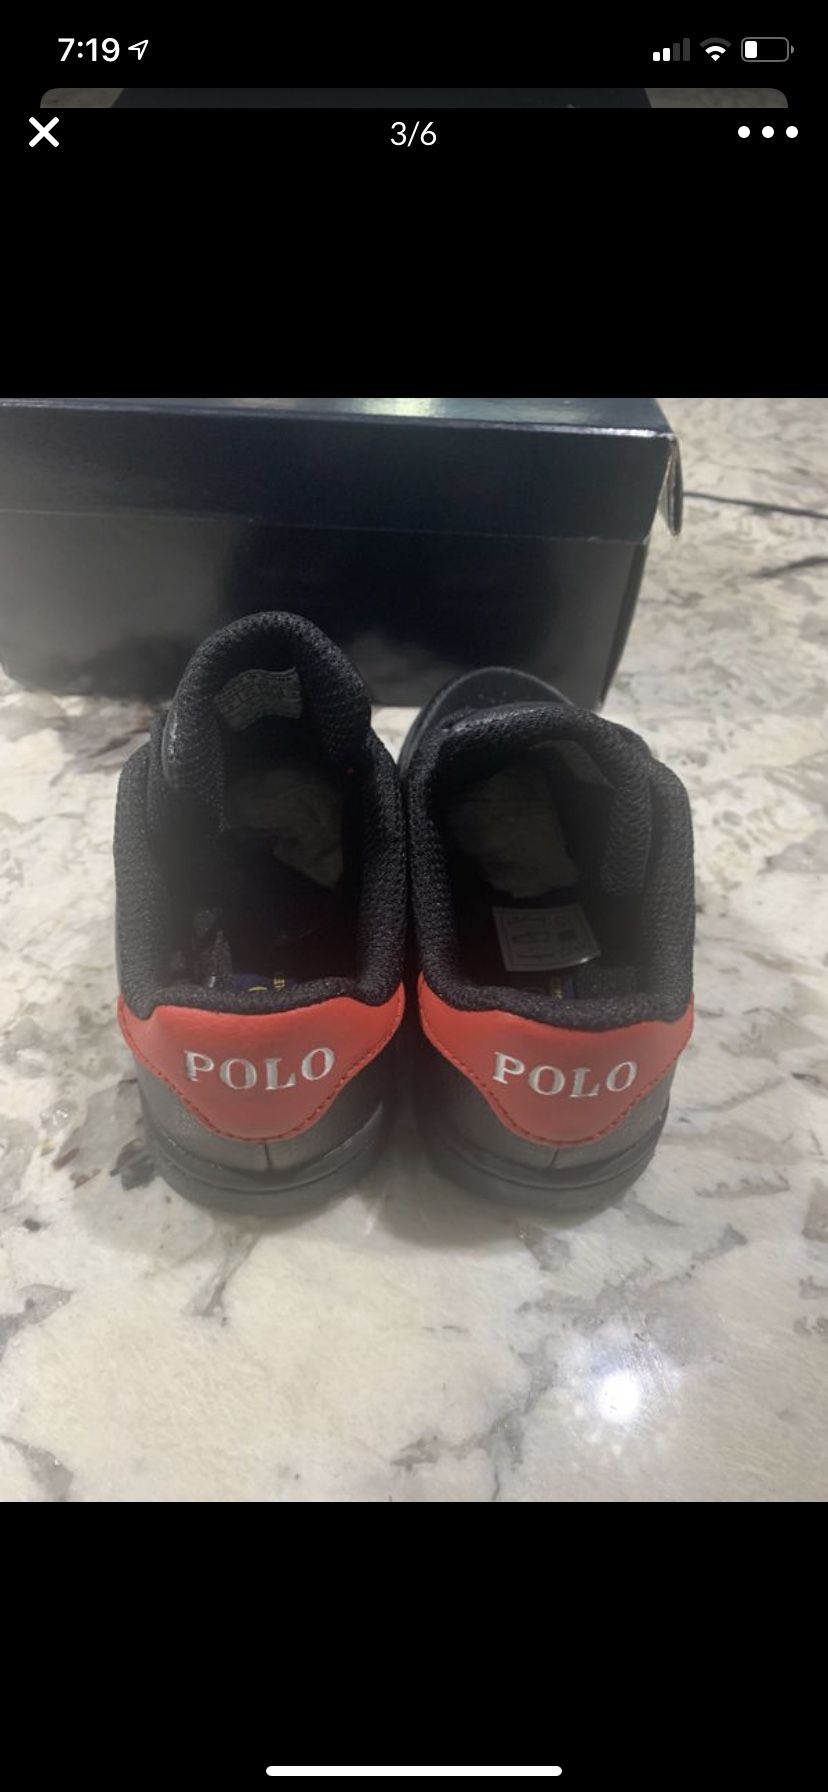 NEW BOYS RALPH LAUREN POLO BLACK/RED SZ 4 TODDLER SHOES JESSUP